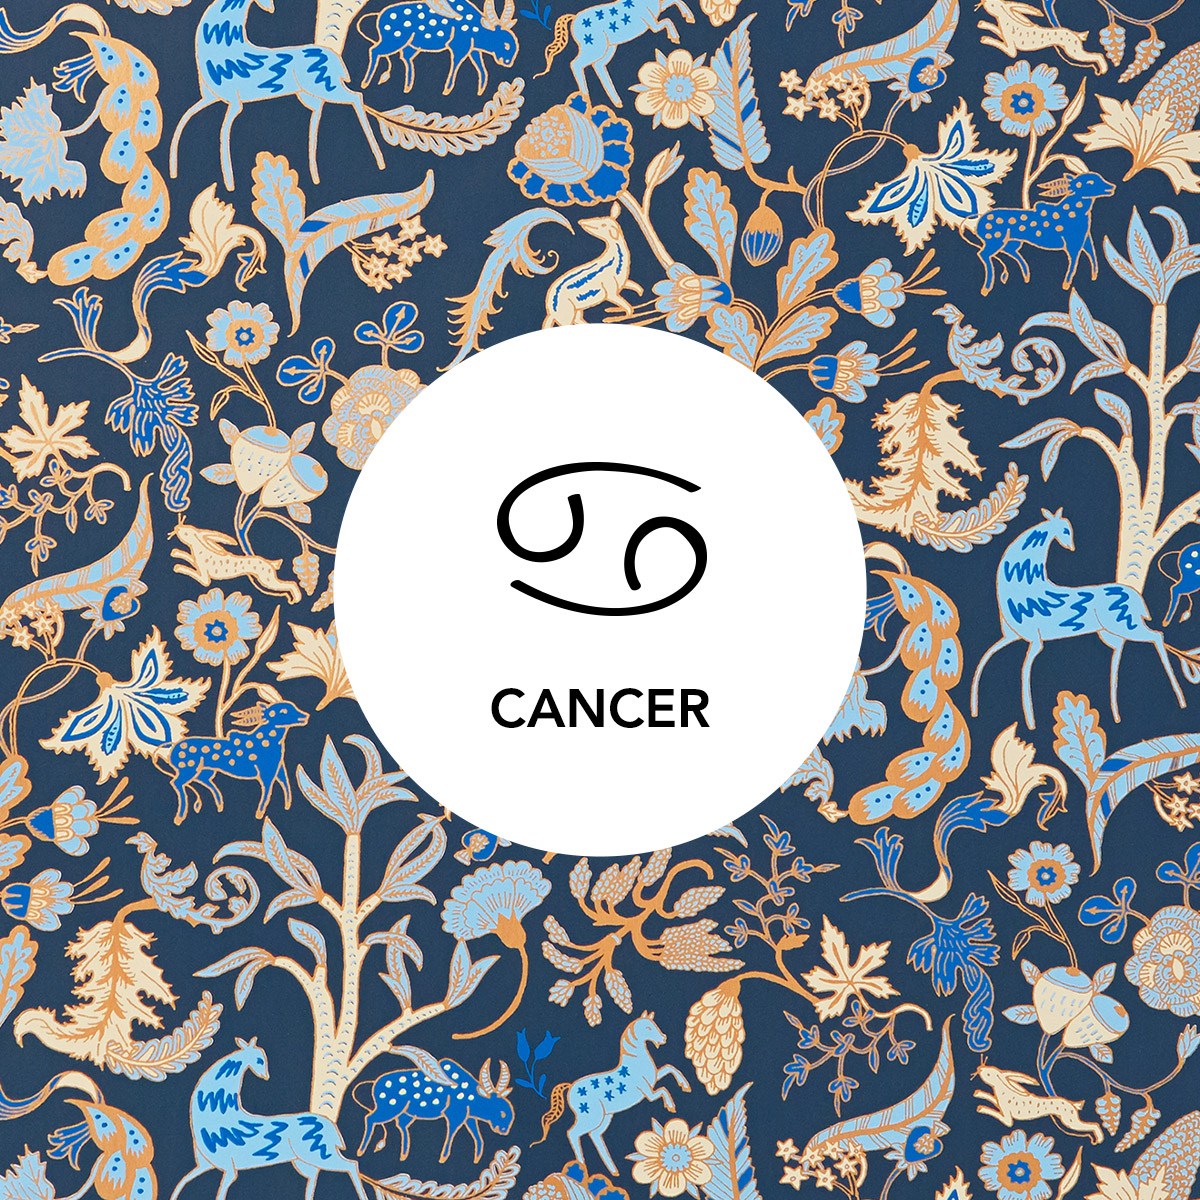 Cancer | Foret Midnight wallpaper | Julia Rothman | Hygge & West